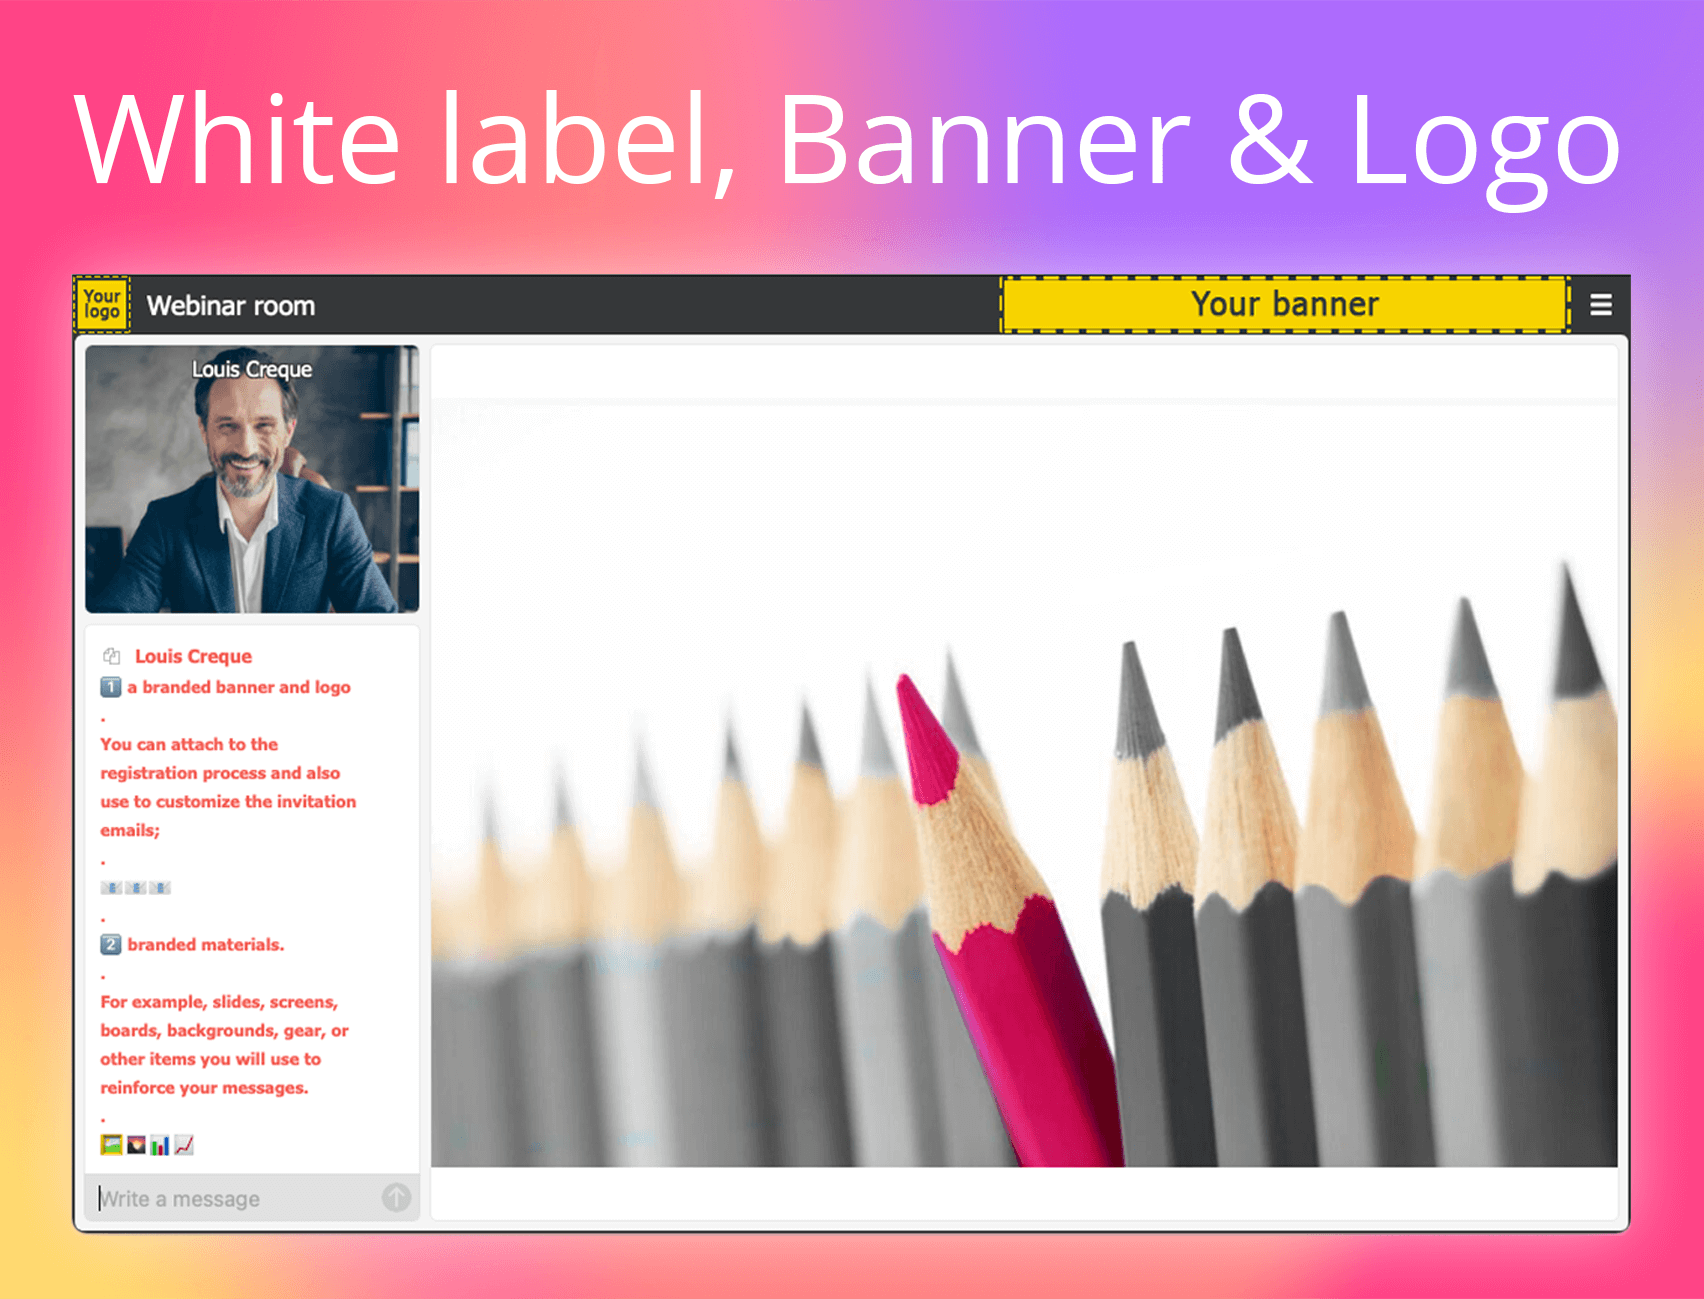 Make it yours! White label your webinar. Add your banner and logo for a bespoke feel. Don't have time? No Problem. We have a range of backgrounds to choose from.